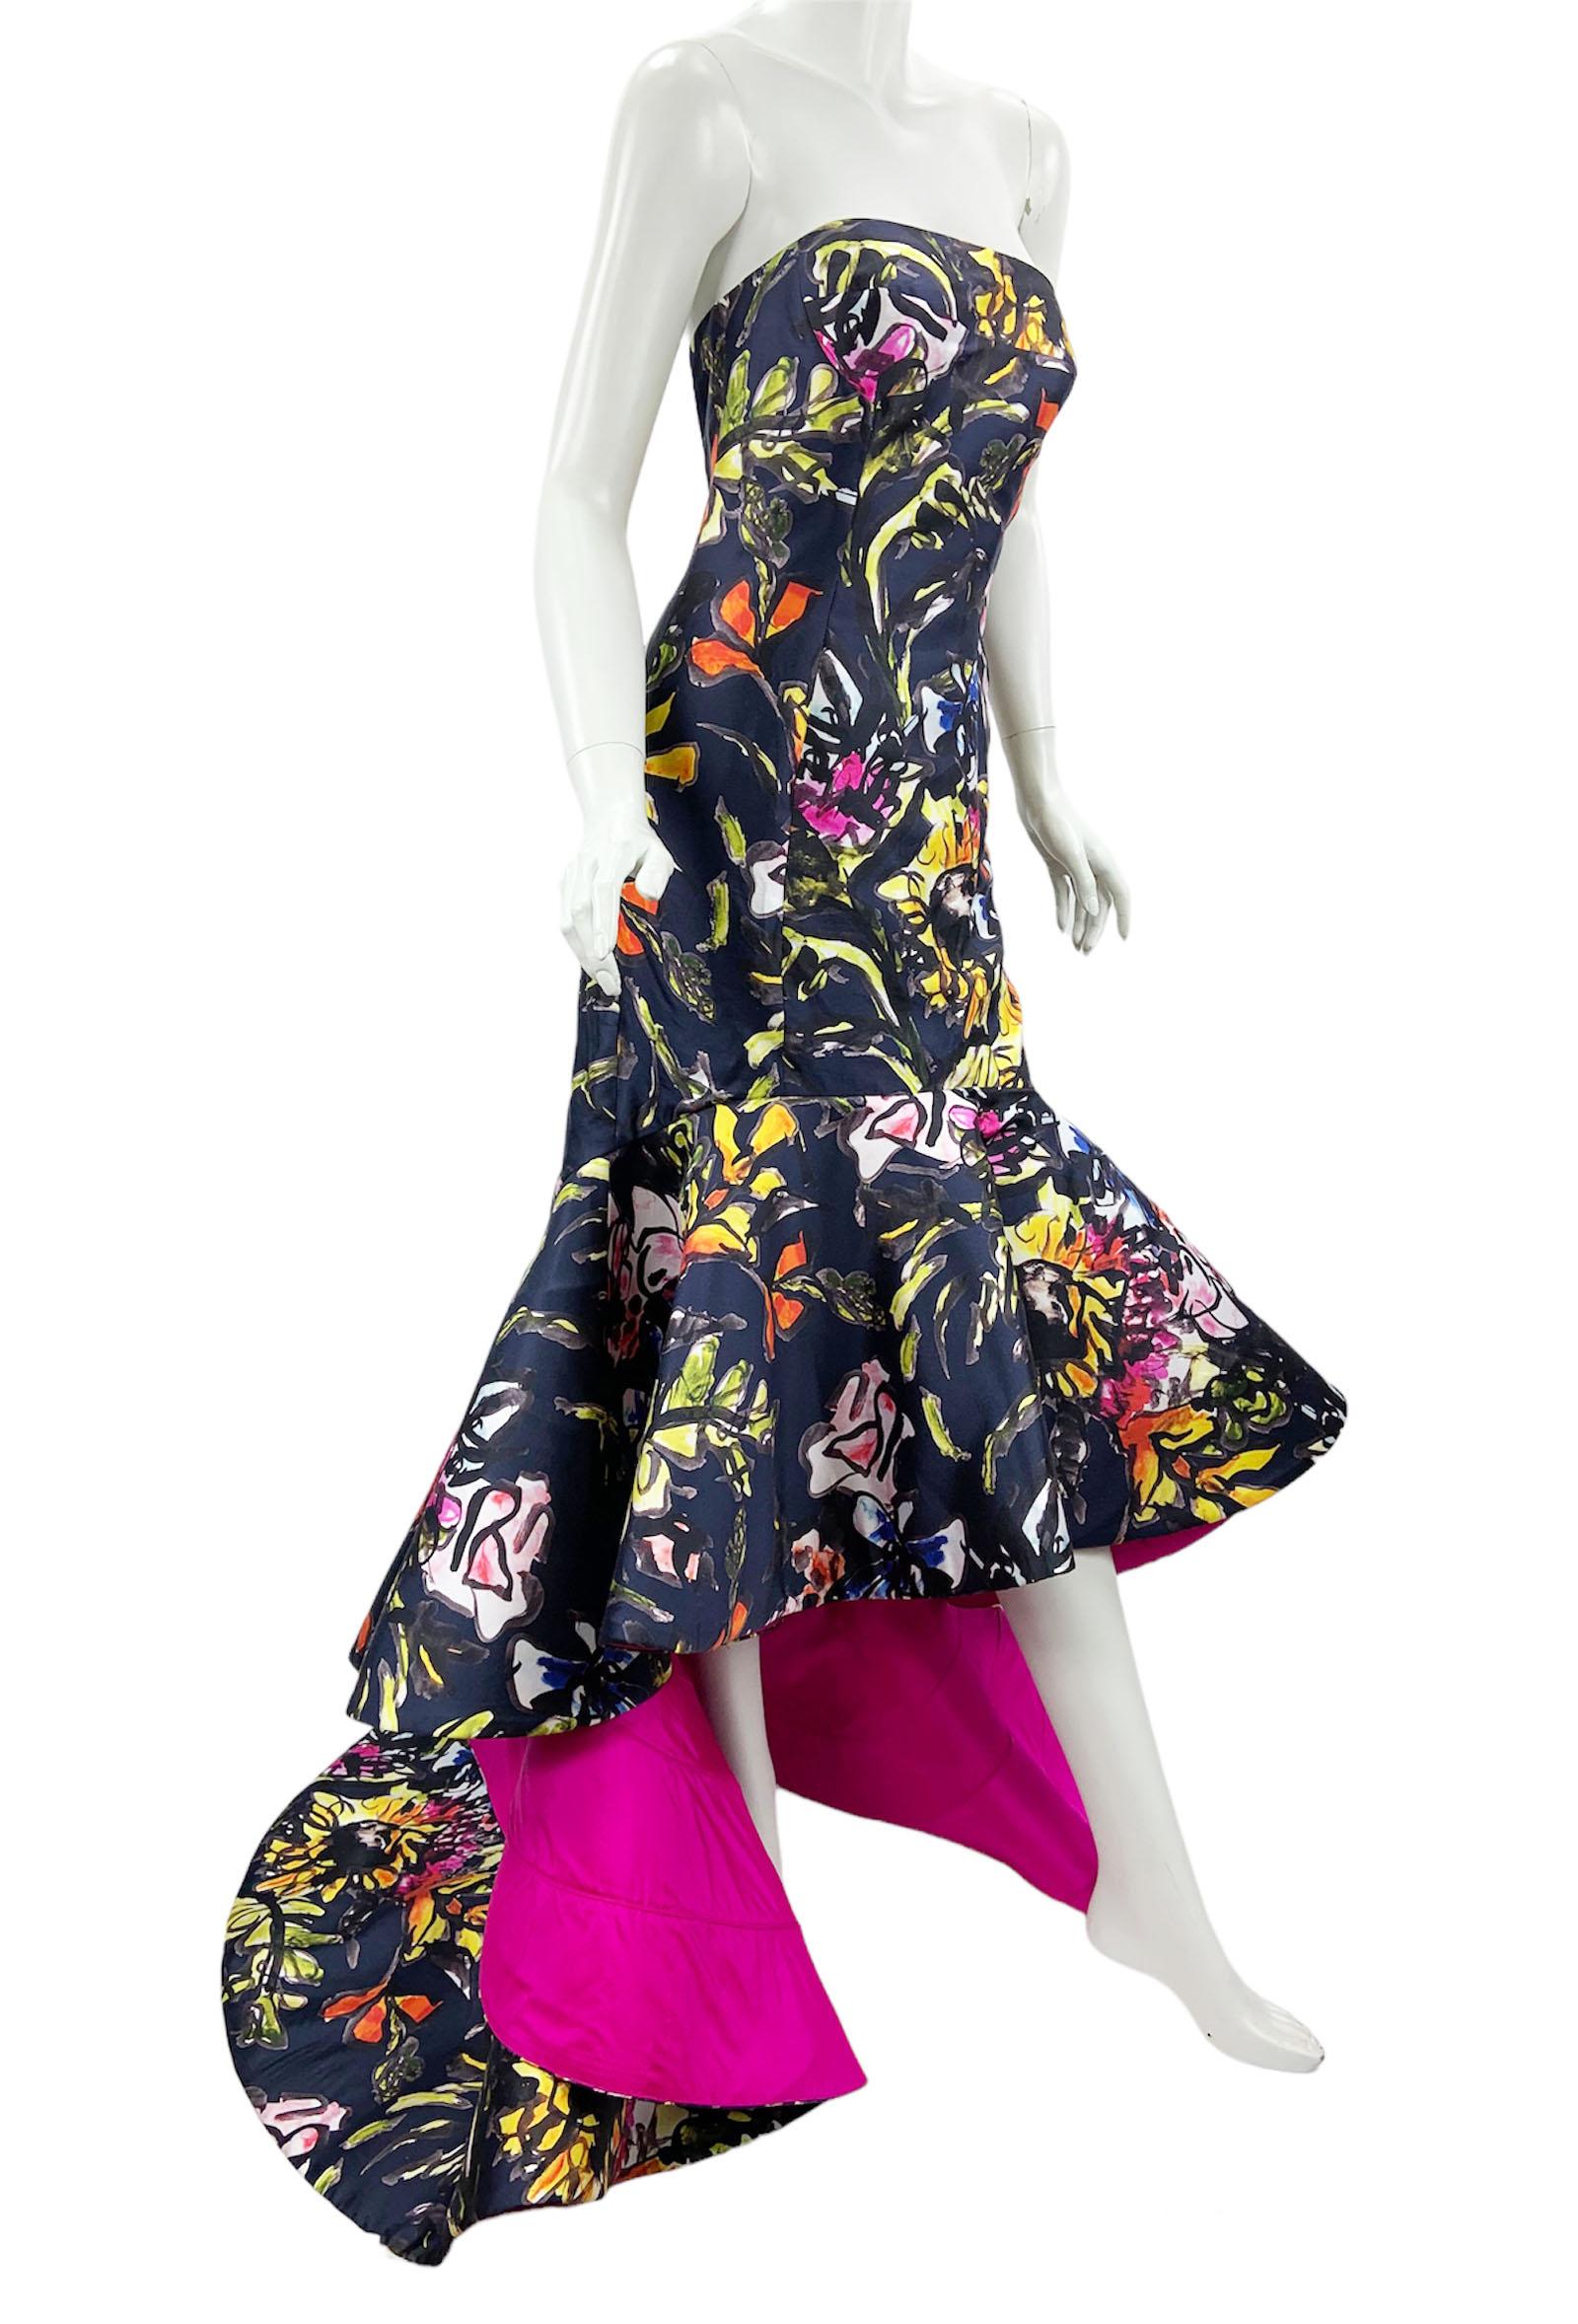 Oscar de la Renta PF 2015 Floral Printed High-Low Corset Dress Gown US size 6 In Excellent Condition For Sale In Montgomery, TX